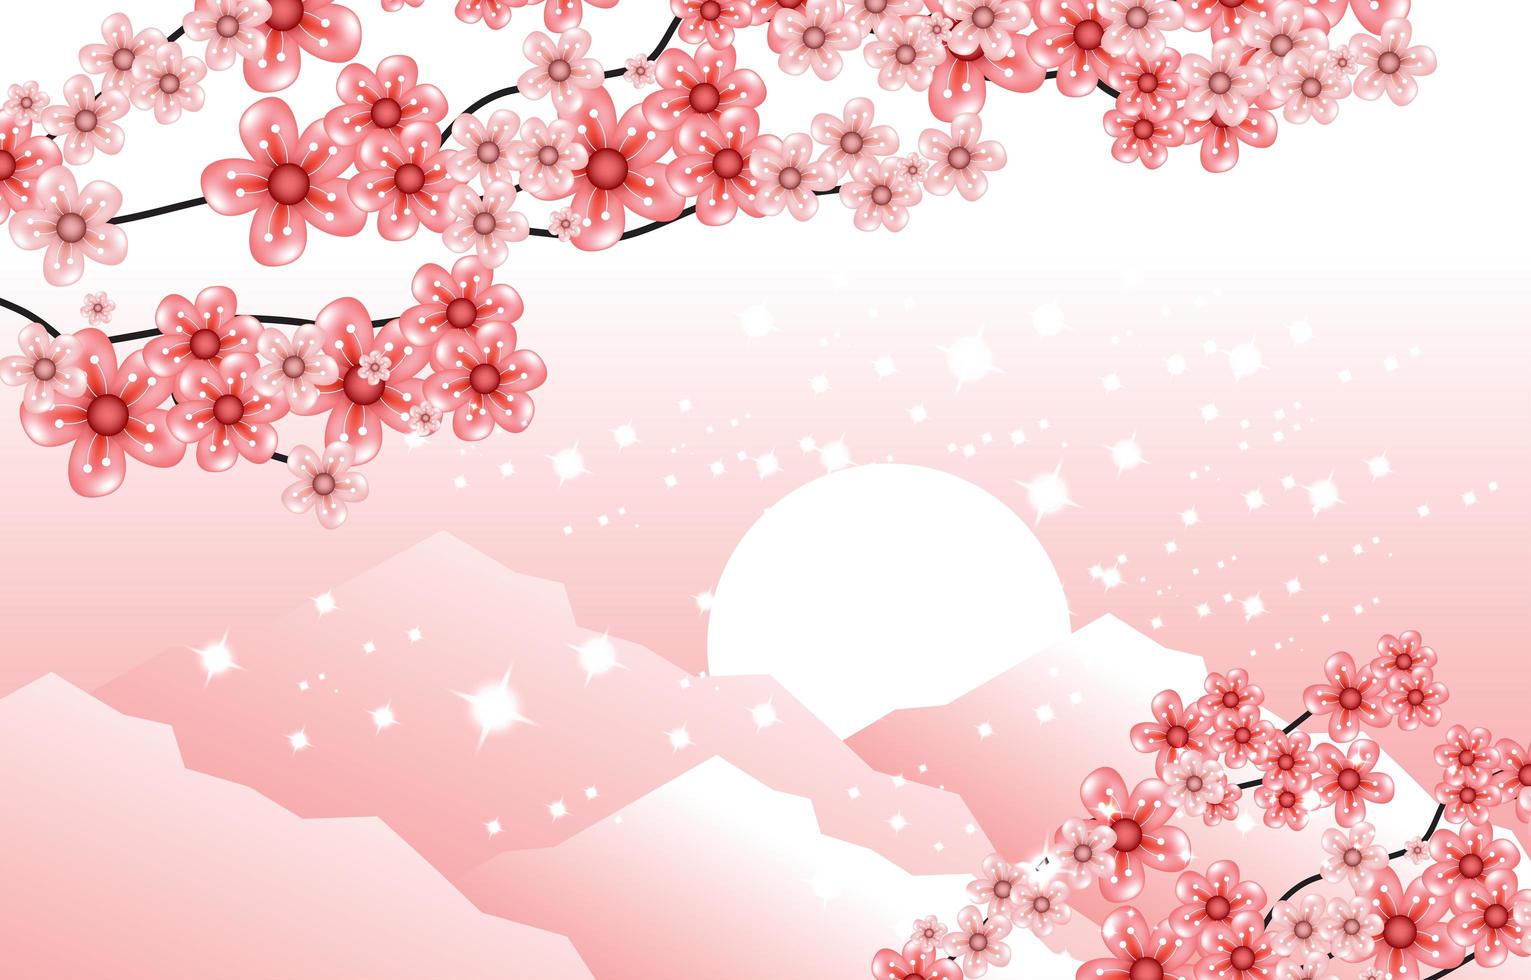 Cherry Blossom with Sparkling Background vector